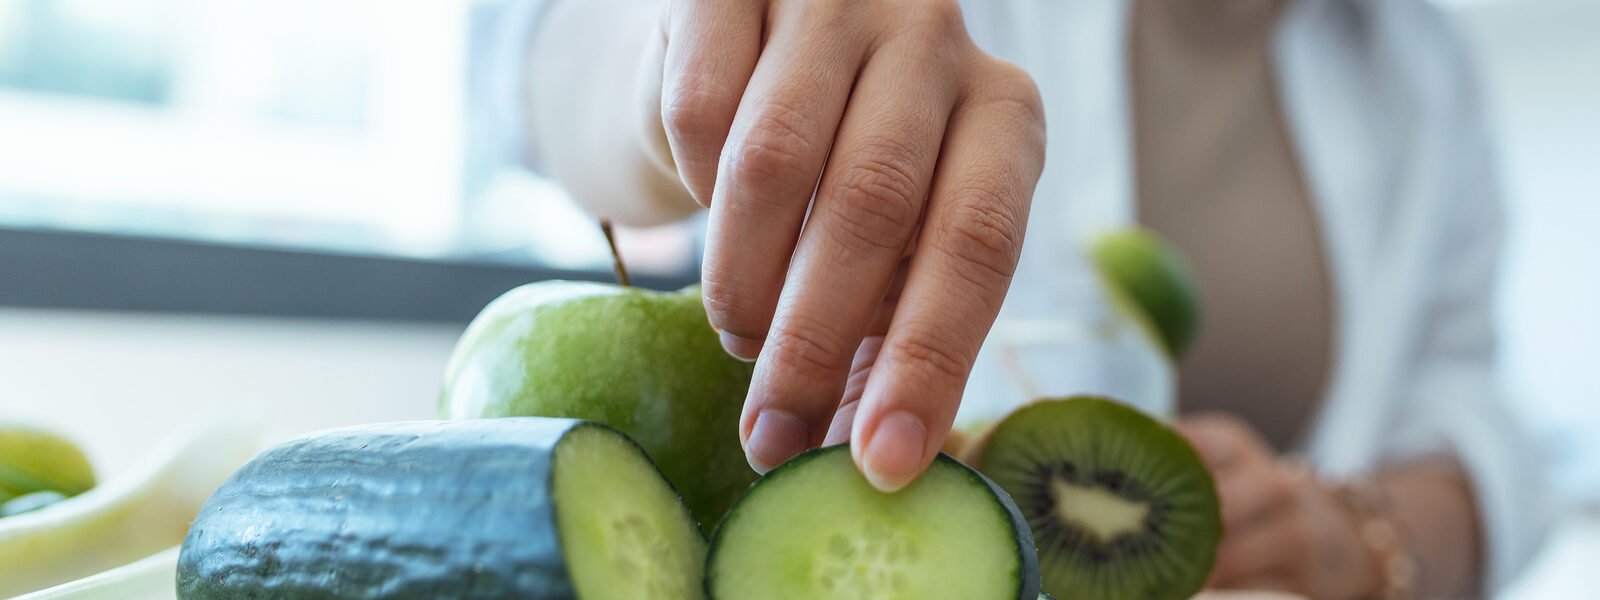 The Unexpected Benefits Of Eating Cucumber At Night - Health Digest